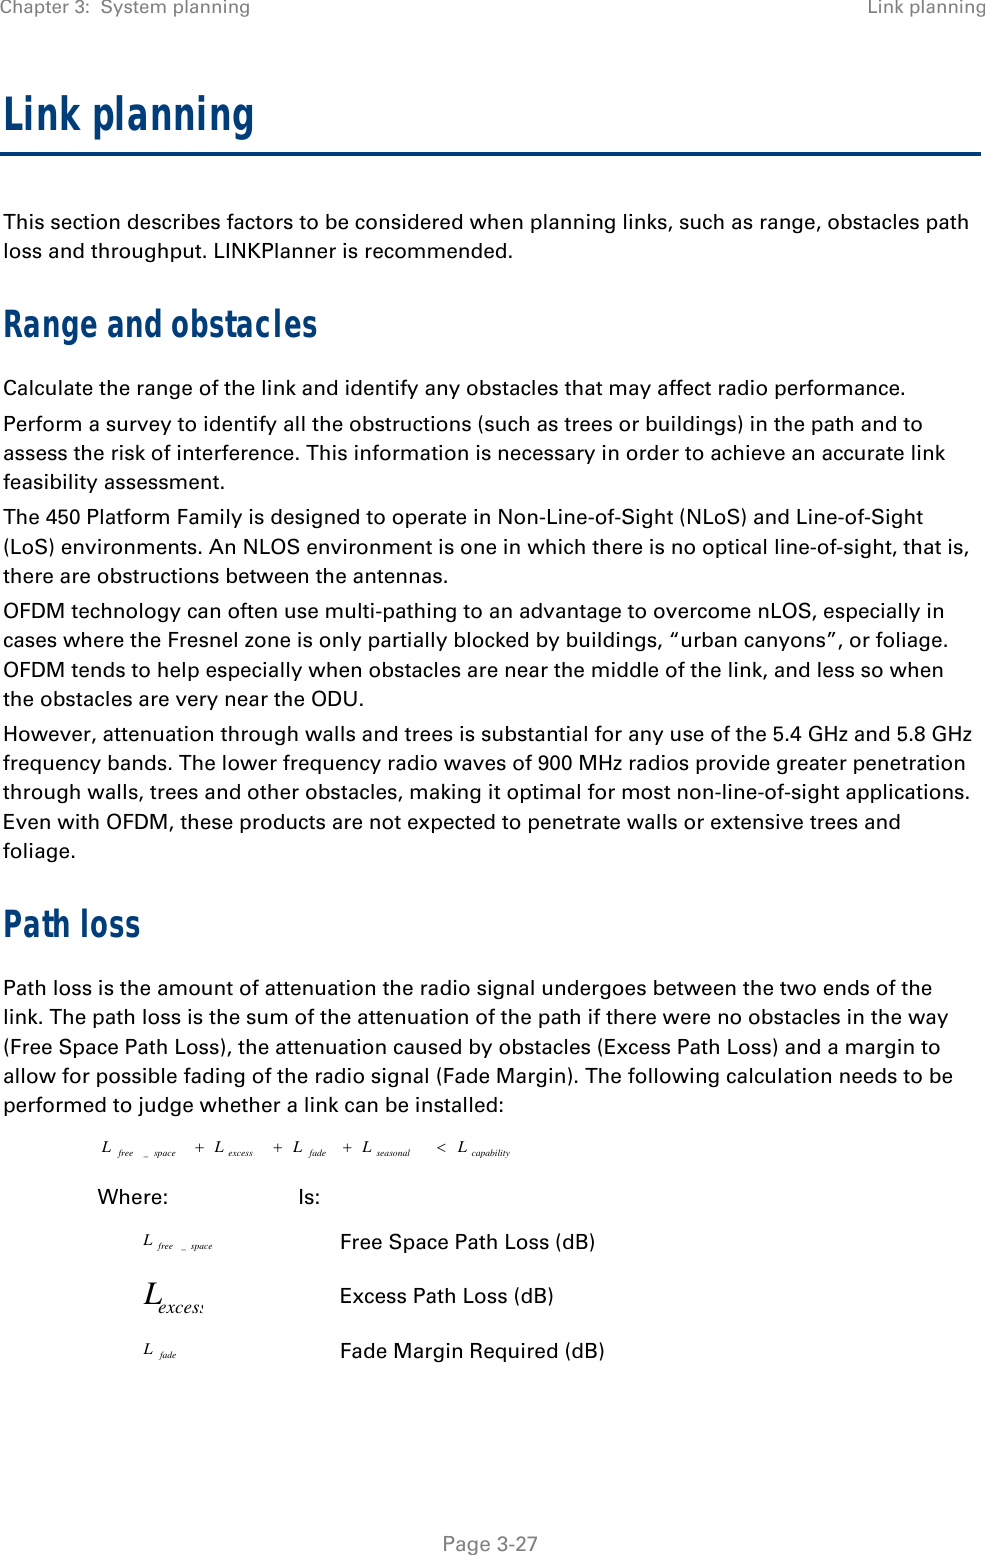 Chapter 3:  System planning  Link planning   Page 3-27 Link planning This section describes factors to be considered when planning links, such as range, obstacles path loss and throughput. LINKPlanner is recommended. Range and obstacles Calculate the range of the link and identify any obstacles that may affect radio performance. Perform a survey to identify all the obstructions (such as trees or buildings) in the path and to assess the risk of interference. This information is necessary in order to achieve an accurate link feasibility assessment. The 450 Platform Family is designed to operate in Non-Line-of-Sight (NLoS) and Line-of-Sight (LoS) environments. An NLOS environment is one in which there is no optical line-of-sight, that is, there are obstructions between the antennas. OFDM technology can often use multi-pathing to an advantage to overcome nLOS, especially in cases where the Fresnel zone is only partially blocked by buildings, “urban canyons”, or foliage. OFDM tends to help especially when obstacles are near the middle of the link, and less so when the obstacles are very near the ODU. However, attenuation through walls and trees is substantial for any use of the 5.4 GHz and 5.8 GHz frequency bands. The lower frequency radio waves of 900 MHz radios provide greater penetration through walls, trees and other obstacles, making it optimal for most non-line-of-sight applications. Even with OFDM, these products are not expected to penetrate walls or extensive trees and foliage. Path loss Path loss is the amount of attenuation the radio signal undergoes between the two ends of the link. The path loss is the sum of the attenuation of the path if there were no obstacles in the way (Free Space Path Loss), the attenuation caused by obstacles (Excess Path Loss) and a margin to allow for possible fading of the radio signal (Fade Margin). The following calculation needs to be performed to judge whether a link can be installed: capabilityseasonalfadeexcessspacefree LLLLL _ Where: Is: spacefreeL_ Free Space Path Loss (dB) excessL Excess Path Loss (dB) fadeL Fade Margin Required (dB) 